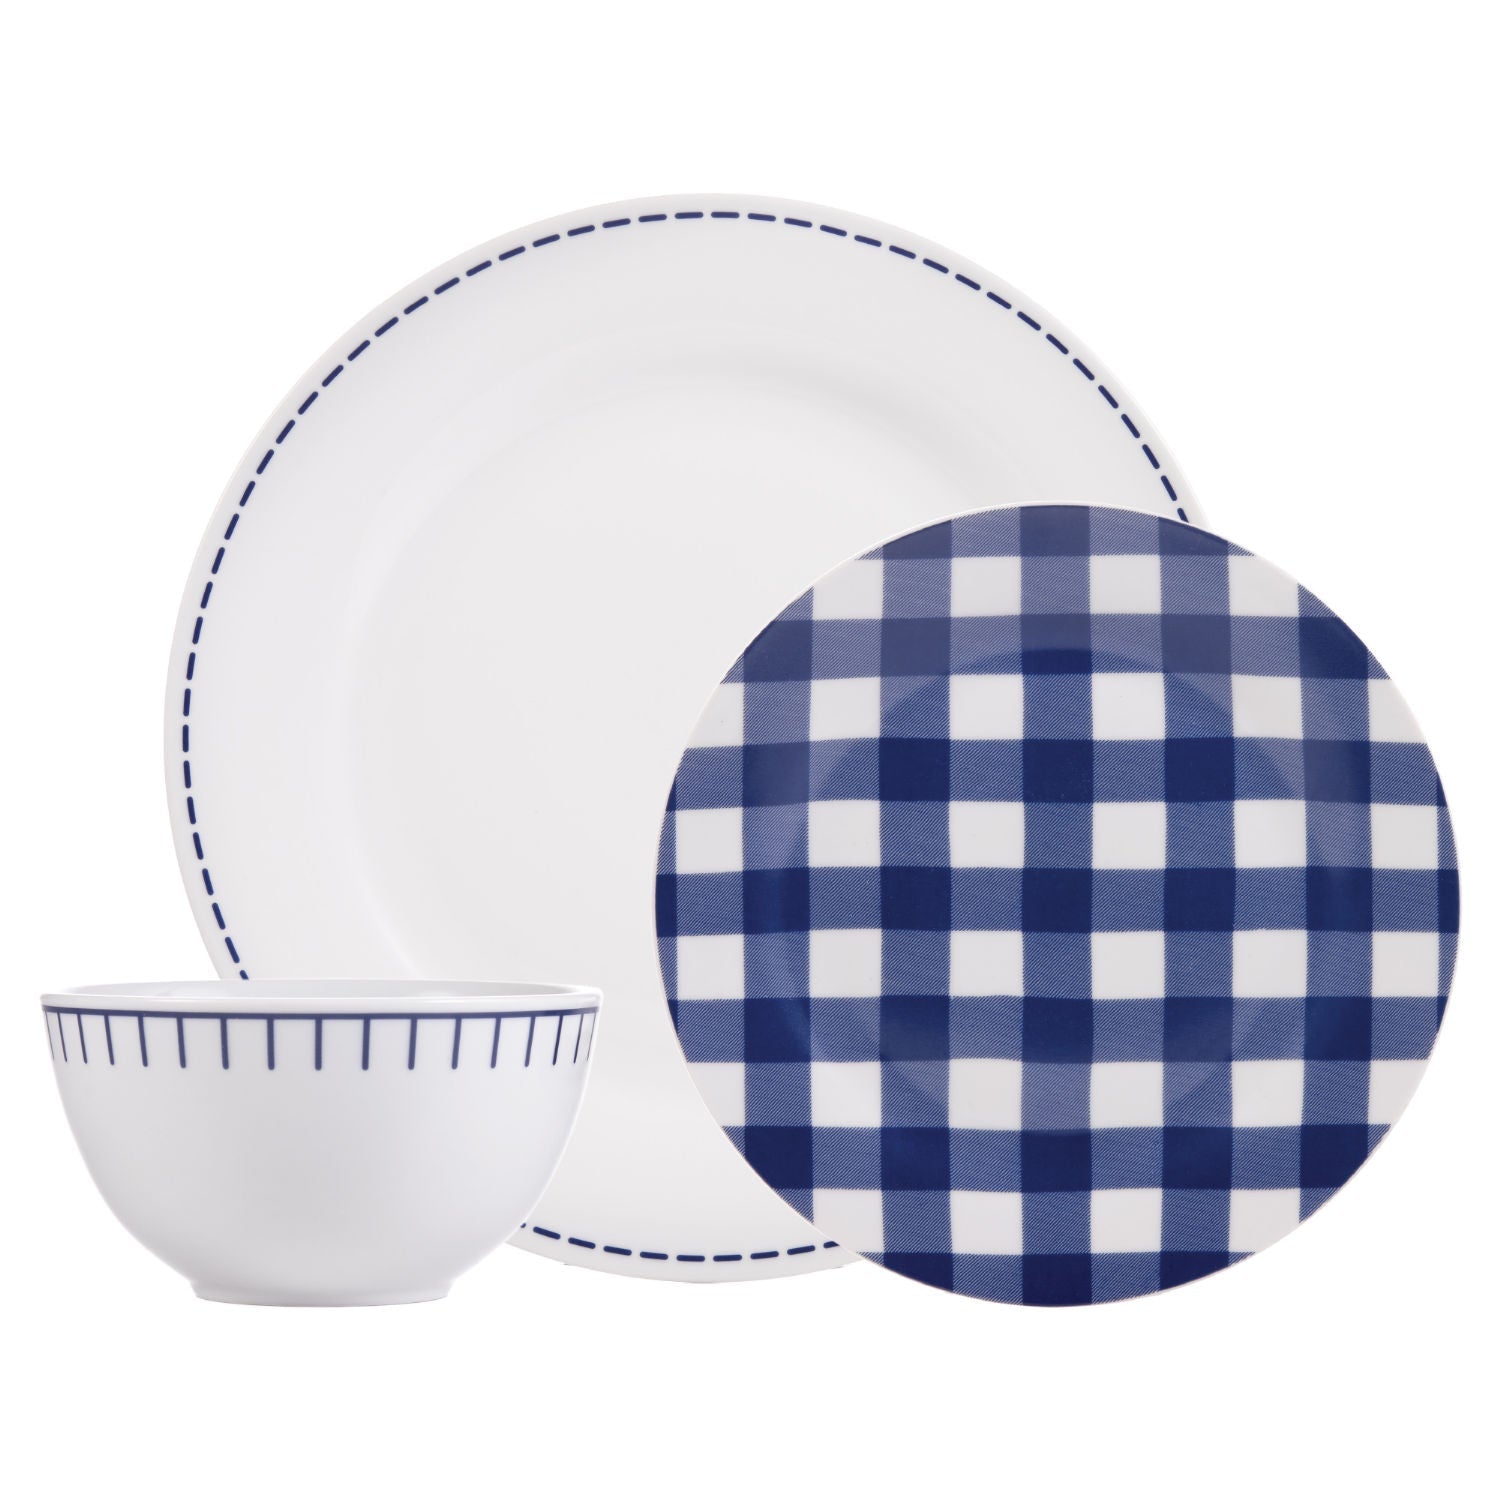 Dinnerware Set 12 Piece Rustic Cottage Navy/White, Service for 4